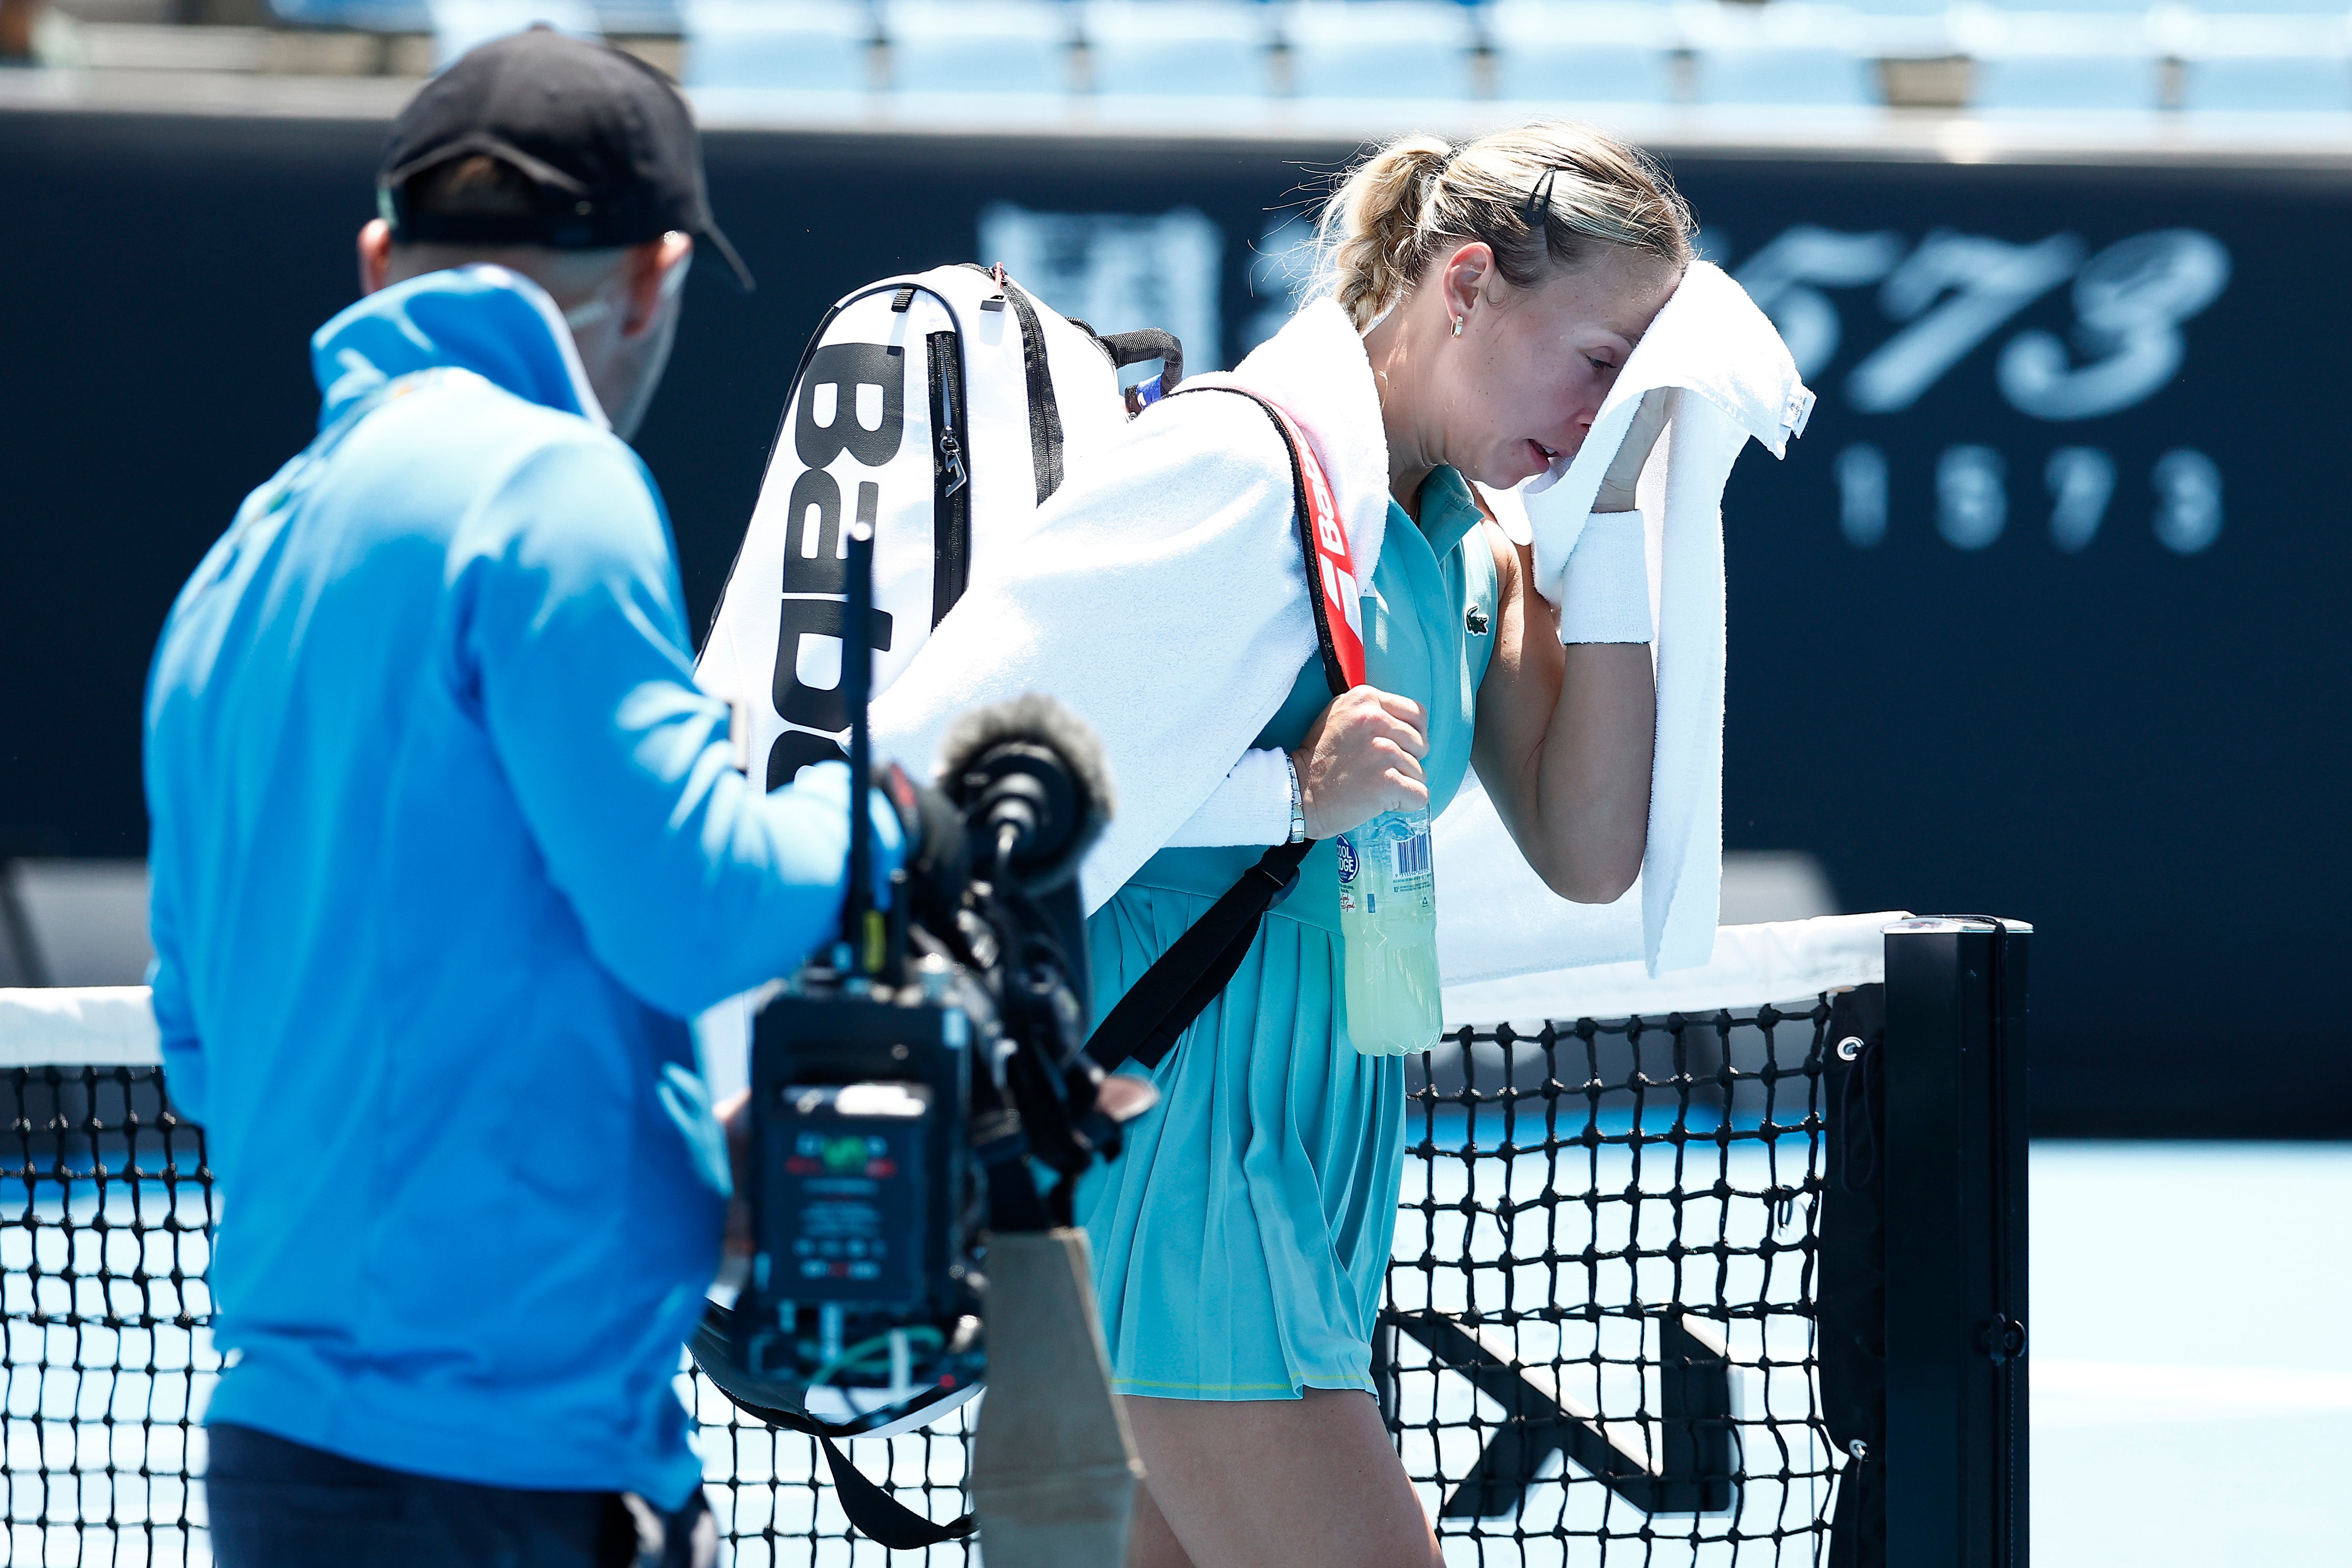 Anett Kontaveit of Estonia walks off 1573 Arena as play is suspended due to extreme heat